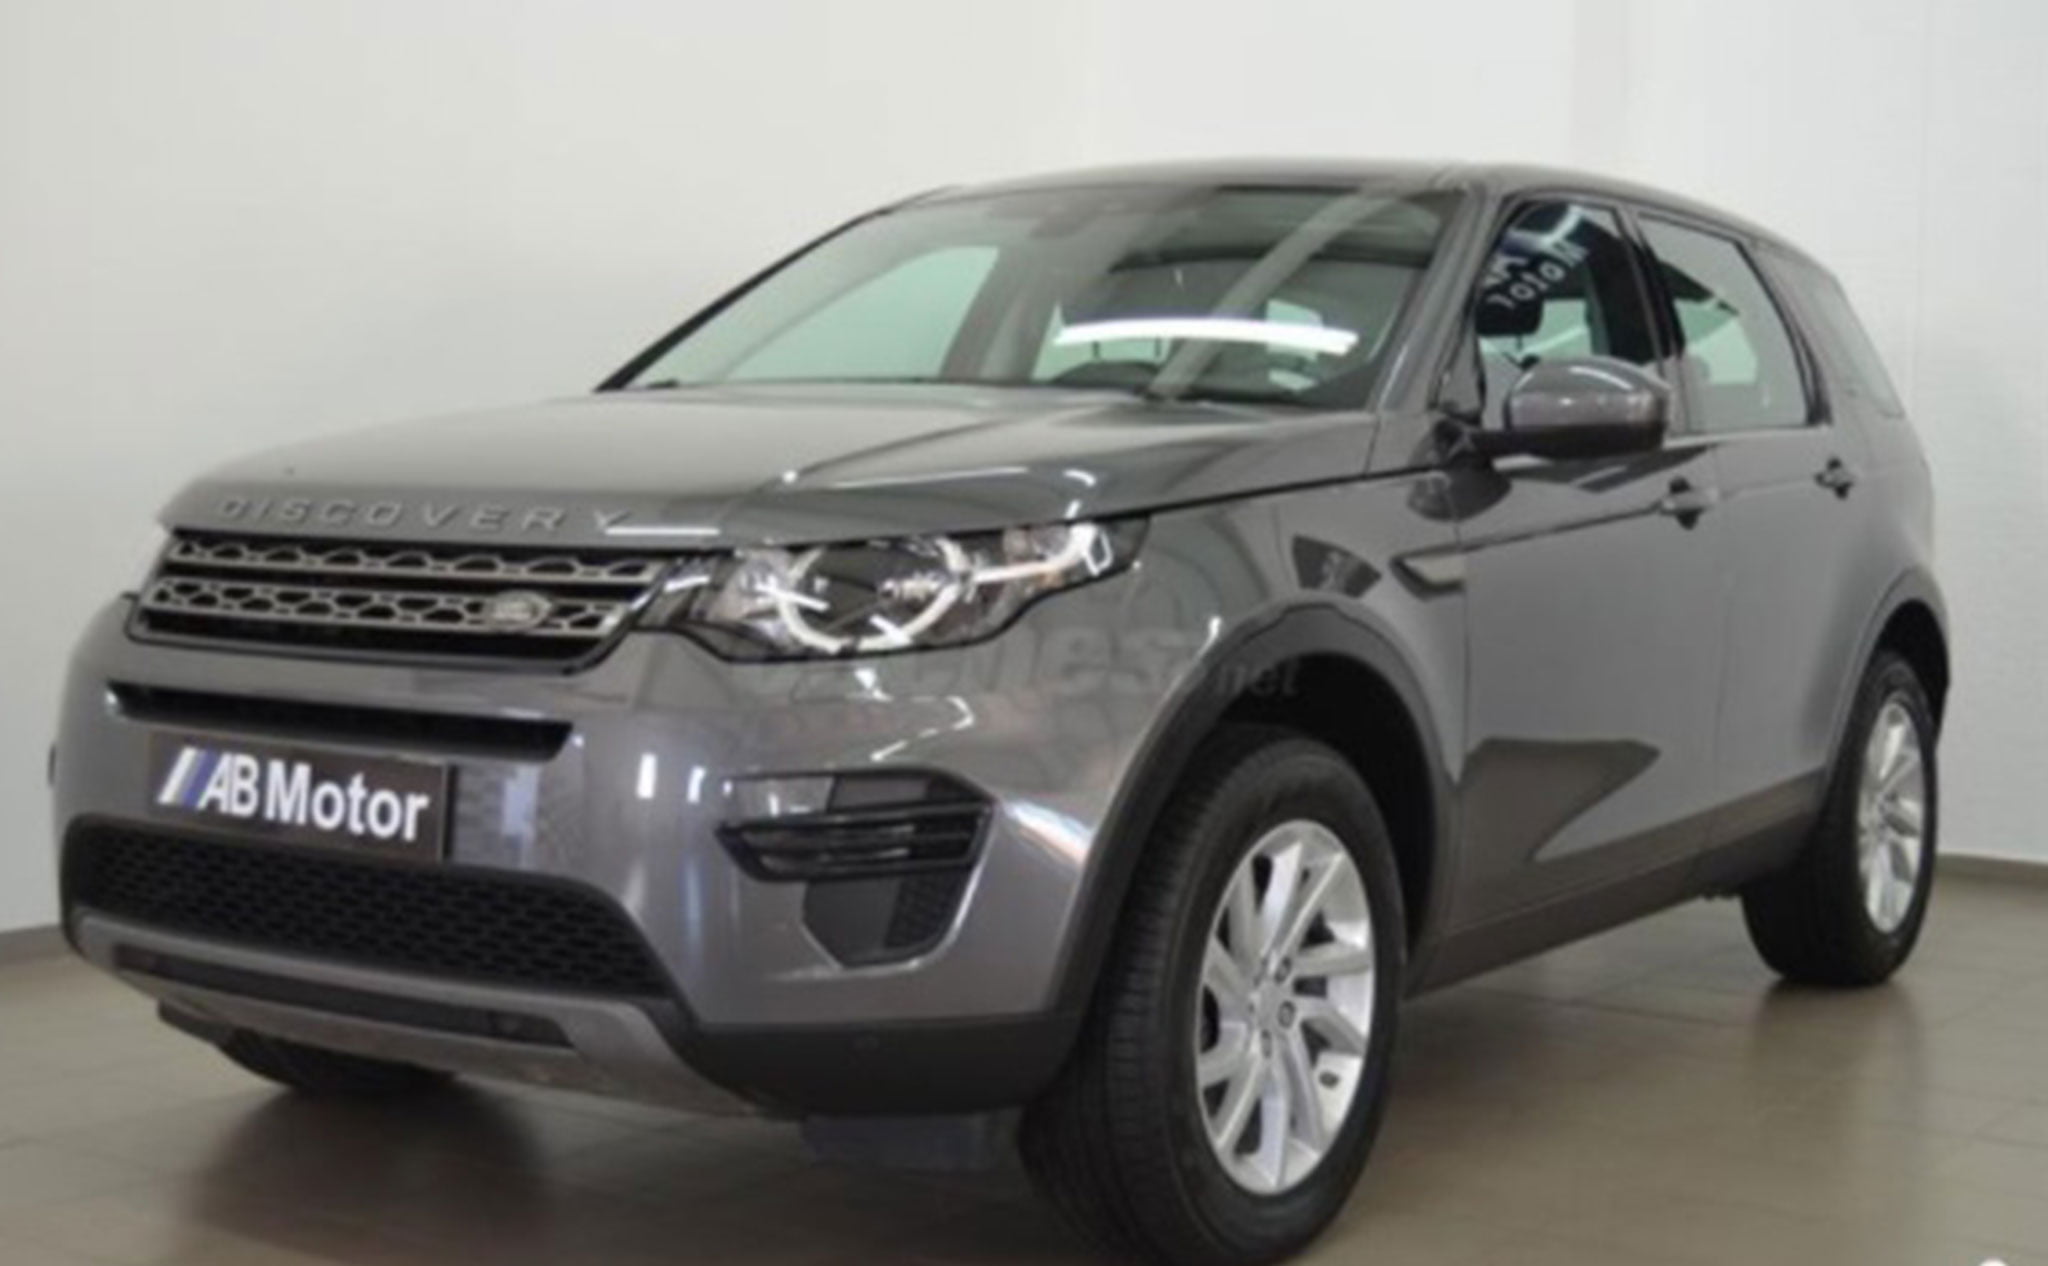 Land Rover Discovery Sport 2.0L – AB Motor